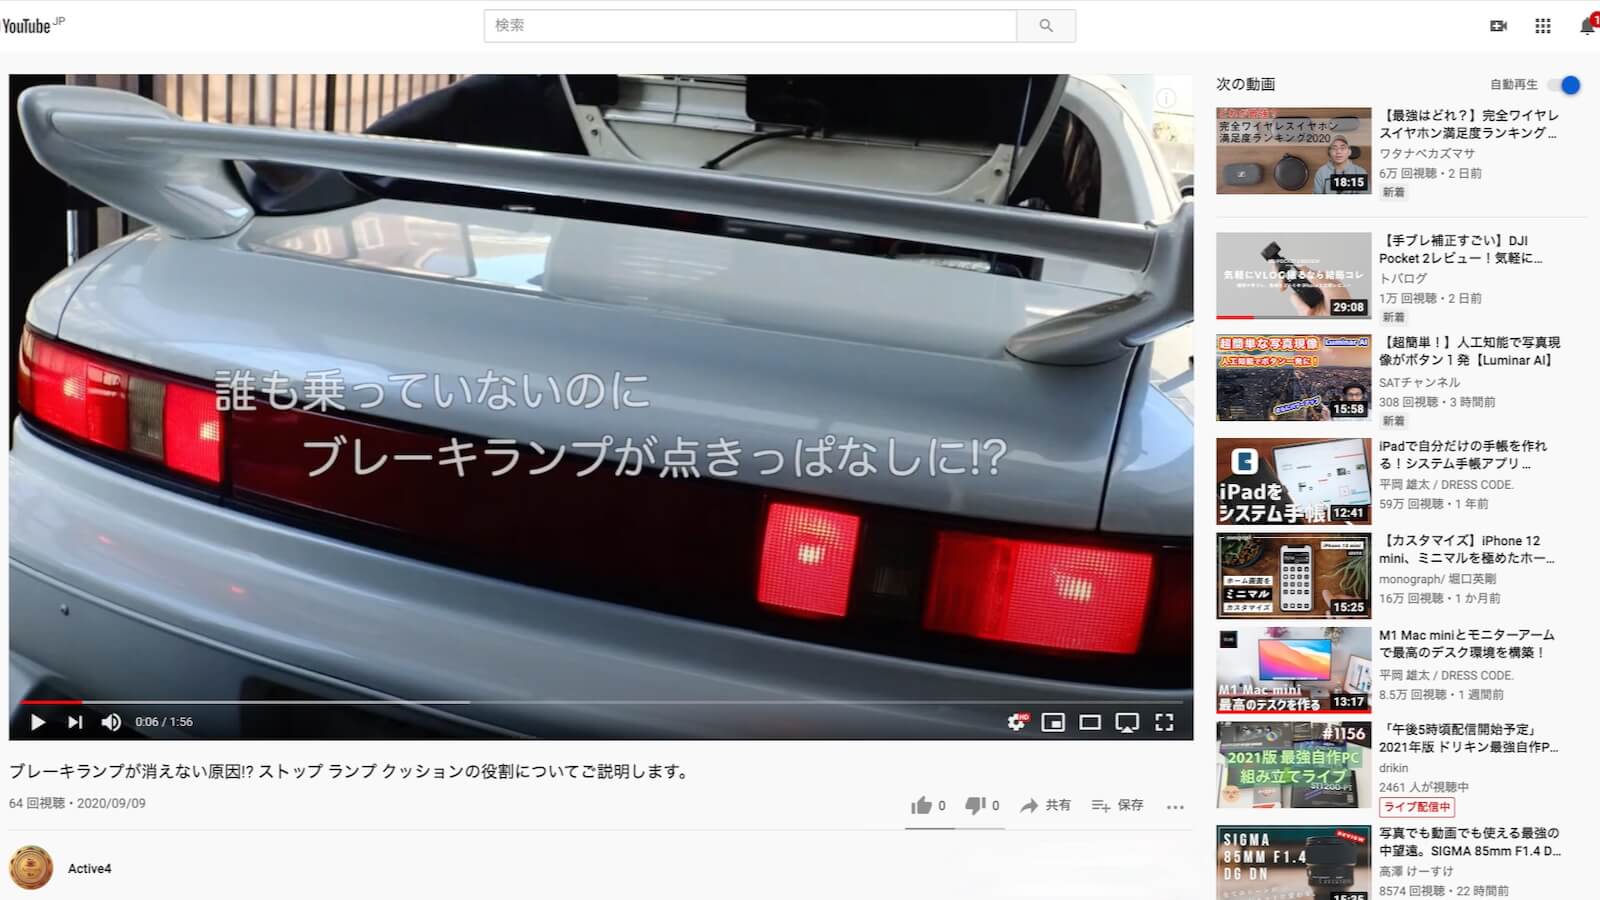 YouTube Active4 channel playback screen